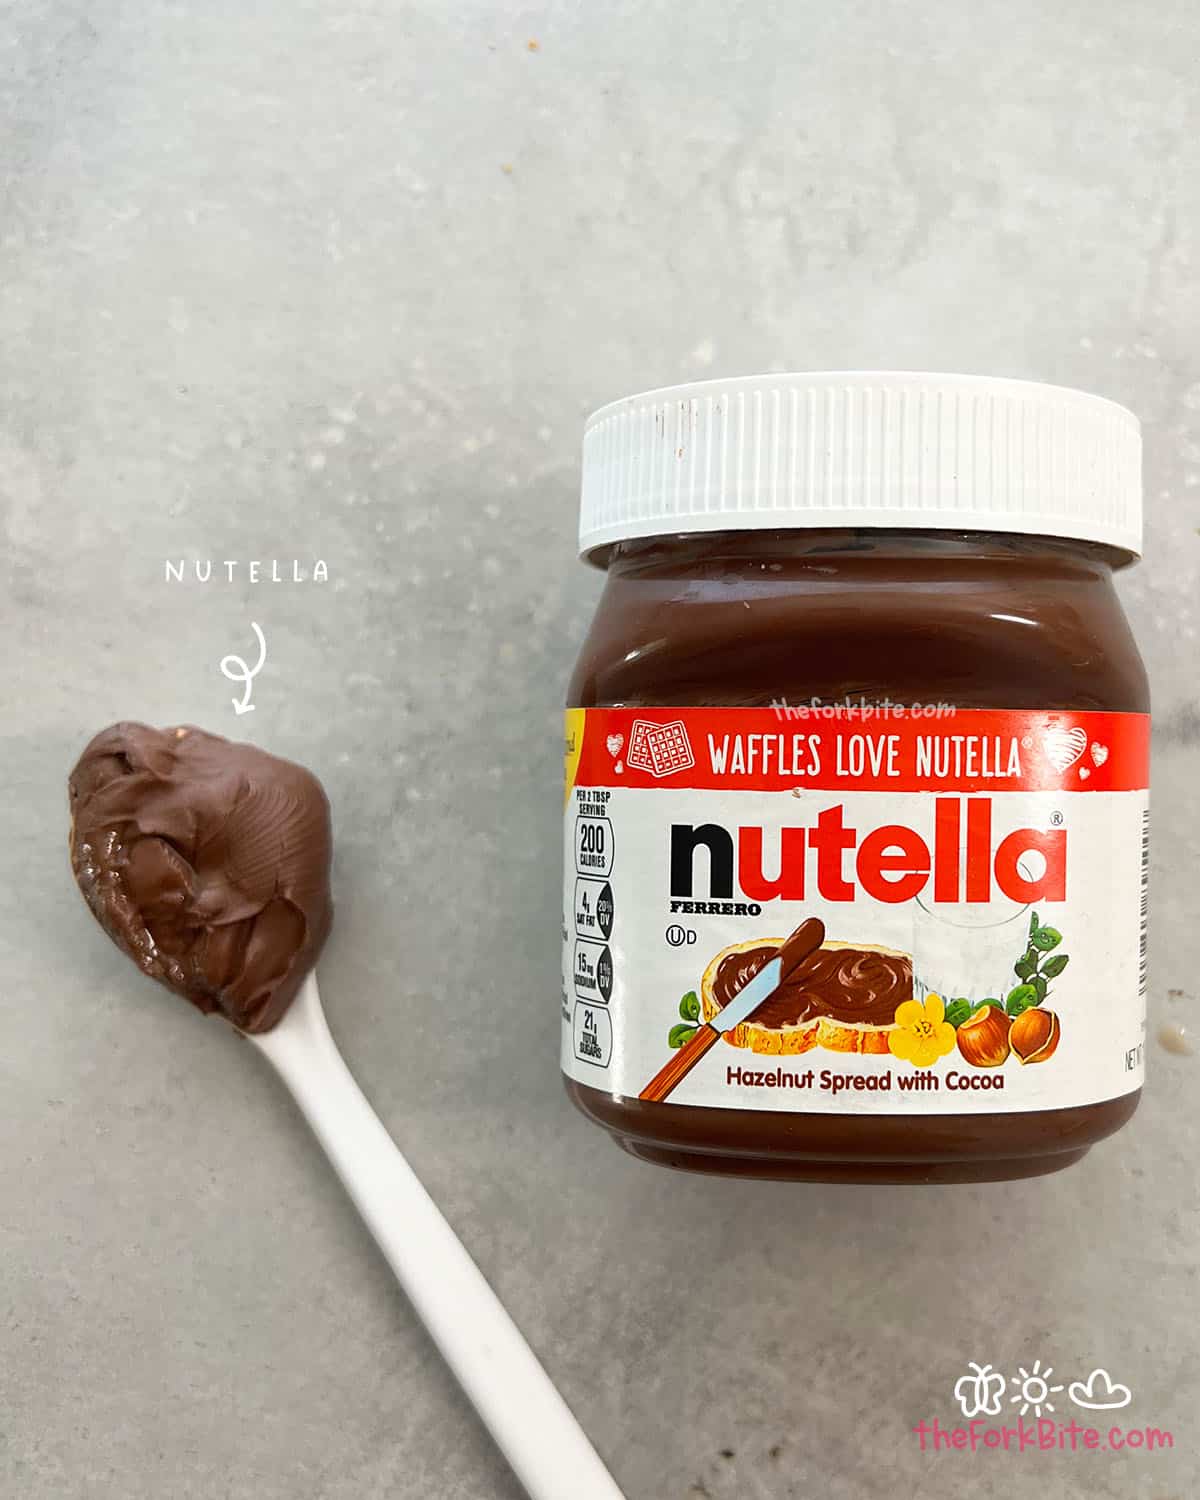 As with most things in life, the answer is both yes and no. According to the official Nutella website, you don't need to refrigerate the product before or after opening it